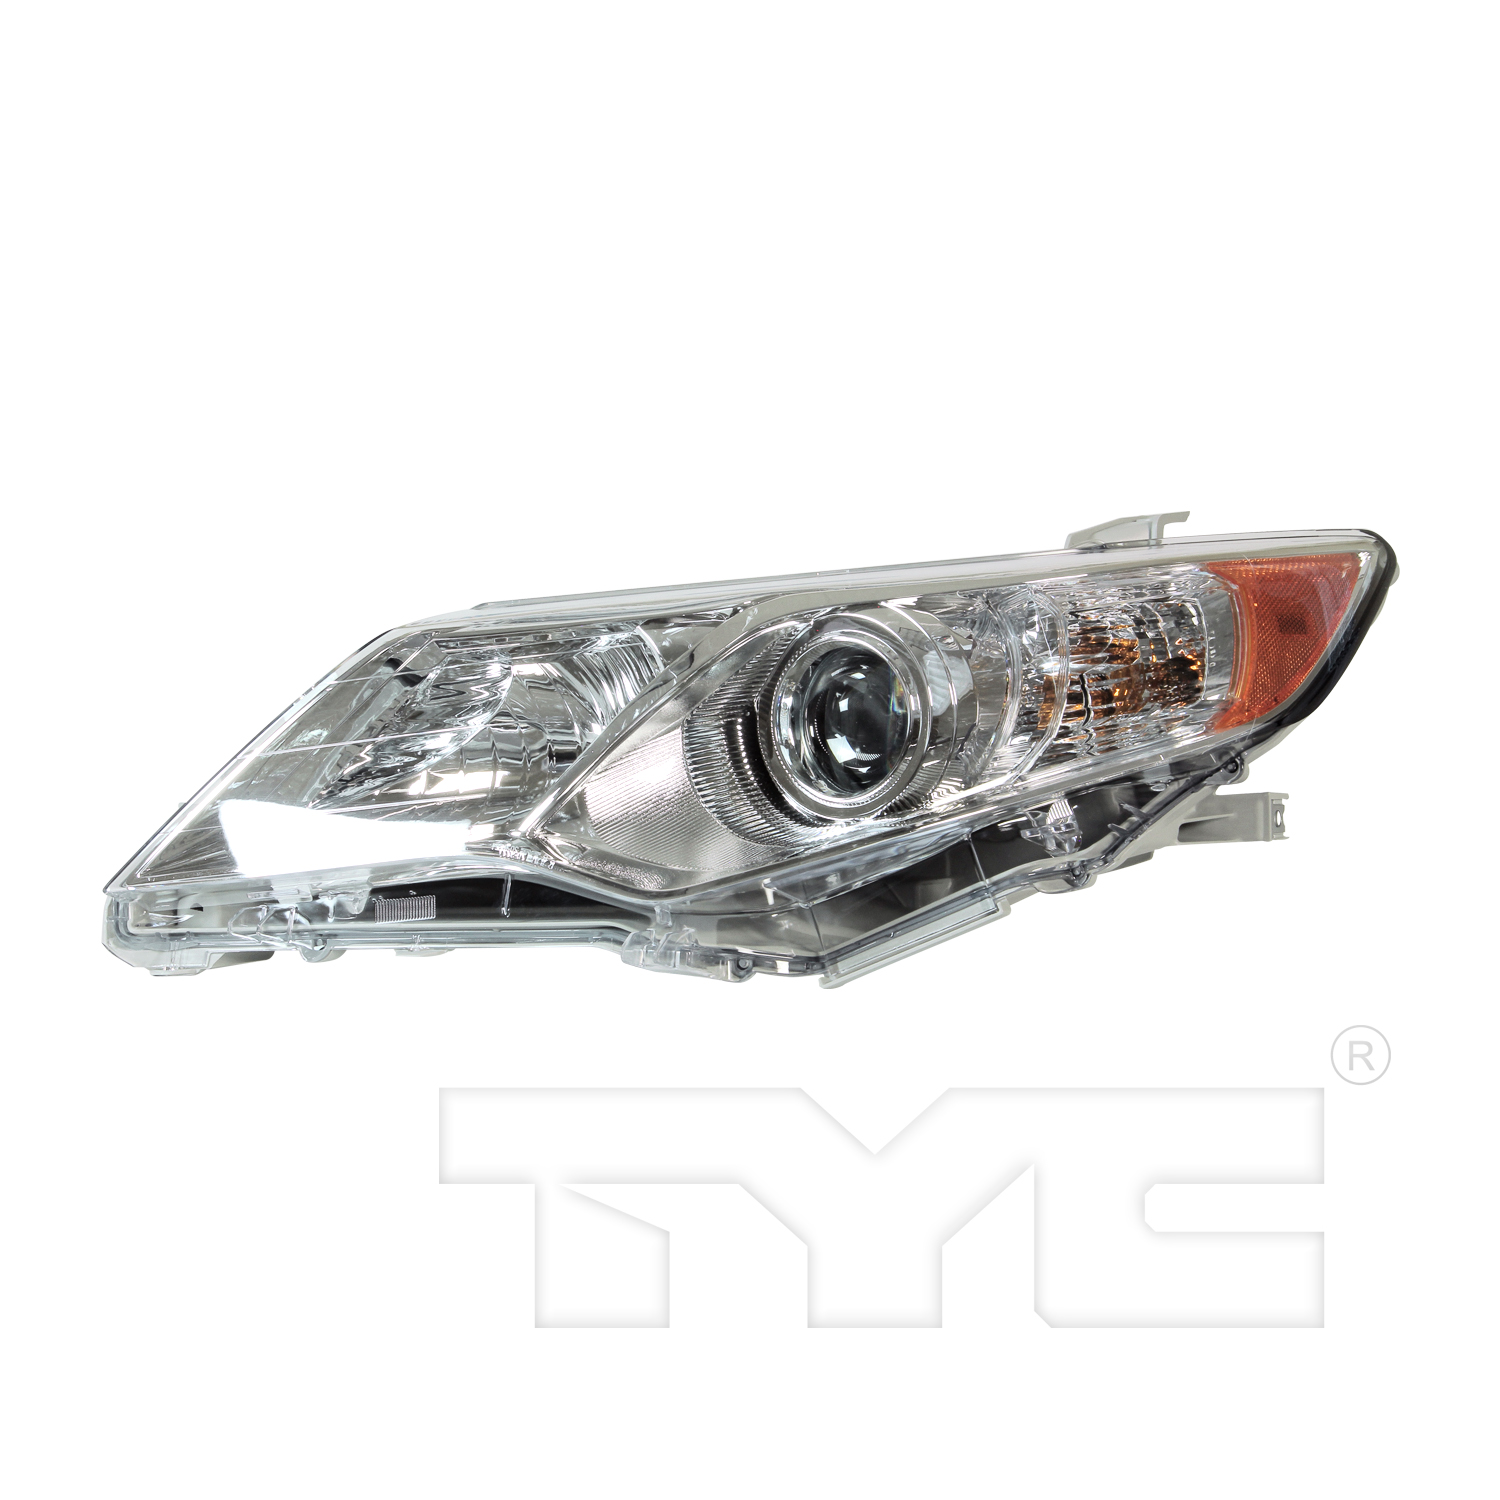 Aftermarket HEADLIGHTS for TOYOTA - CAMRY, CAMRY,12-14,LT Headlamp assy composite